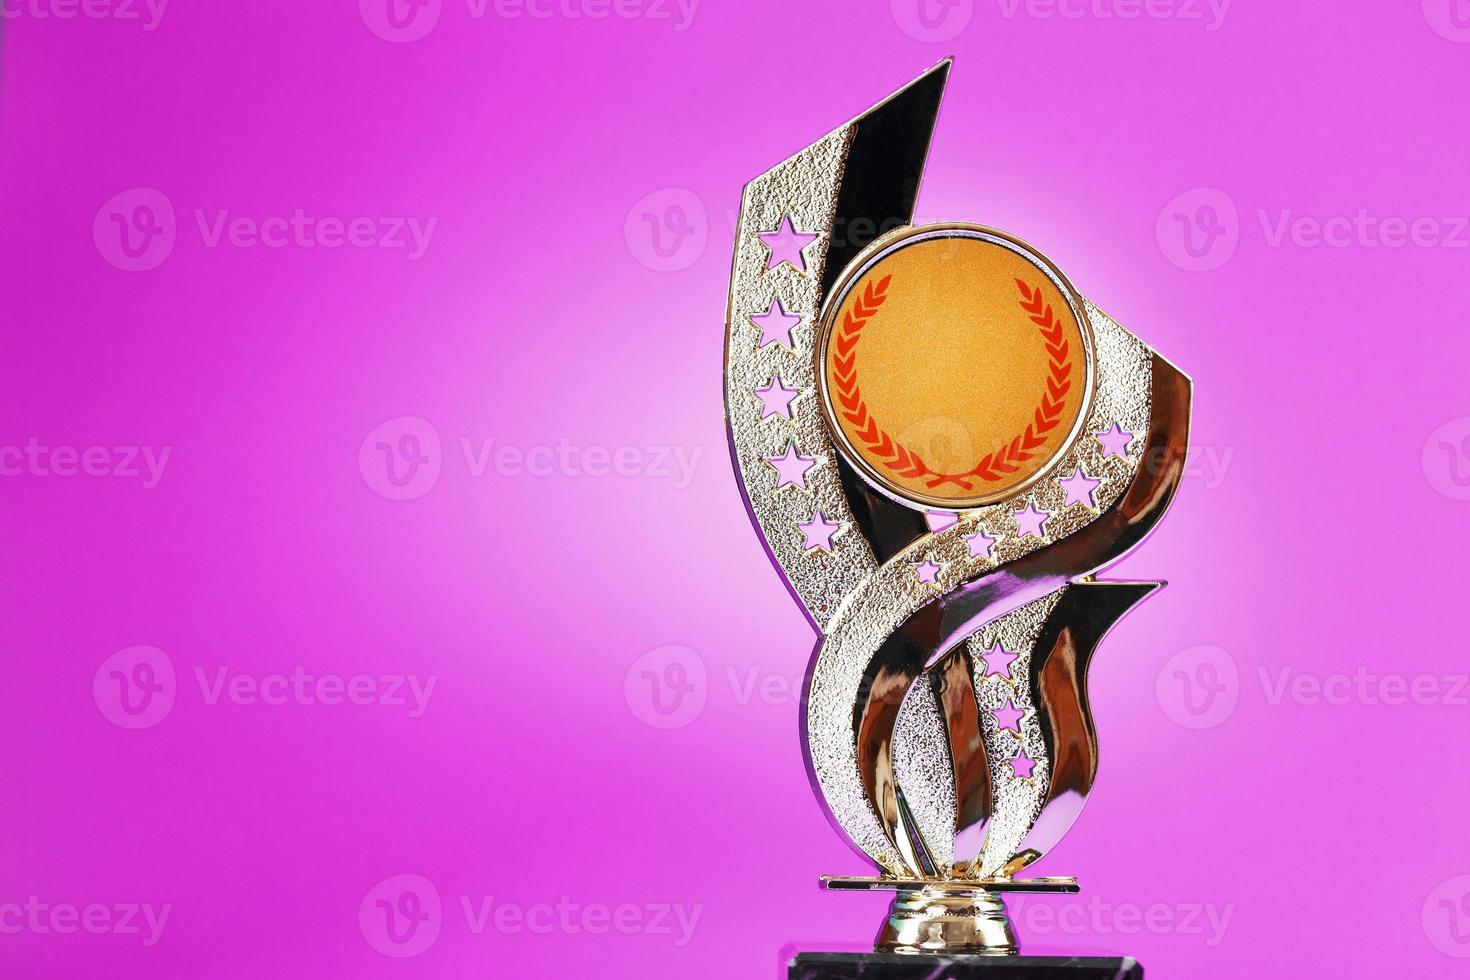 Superprize statuette made of gold on a pink background. photo